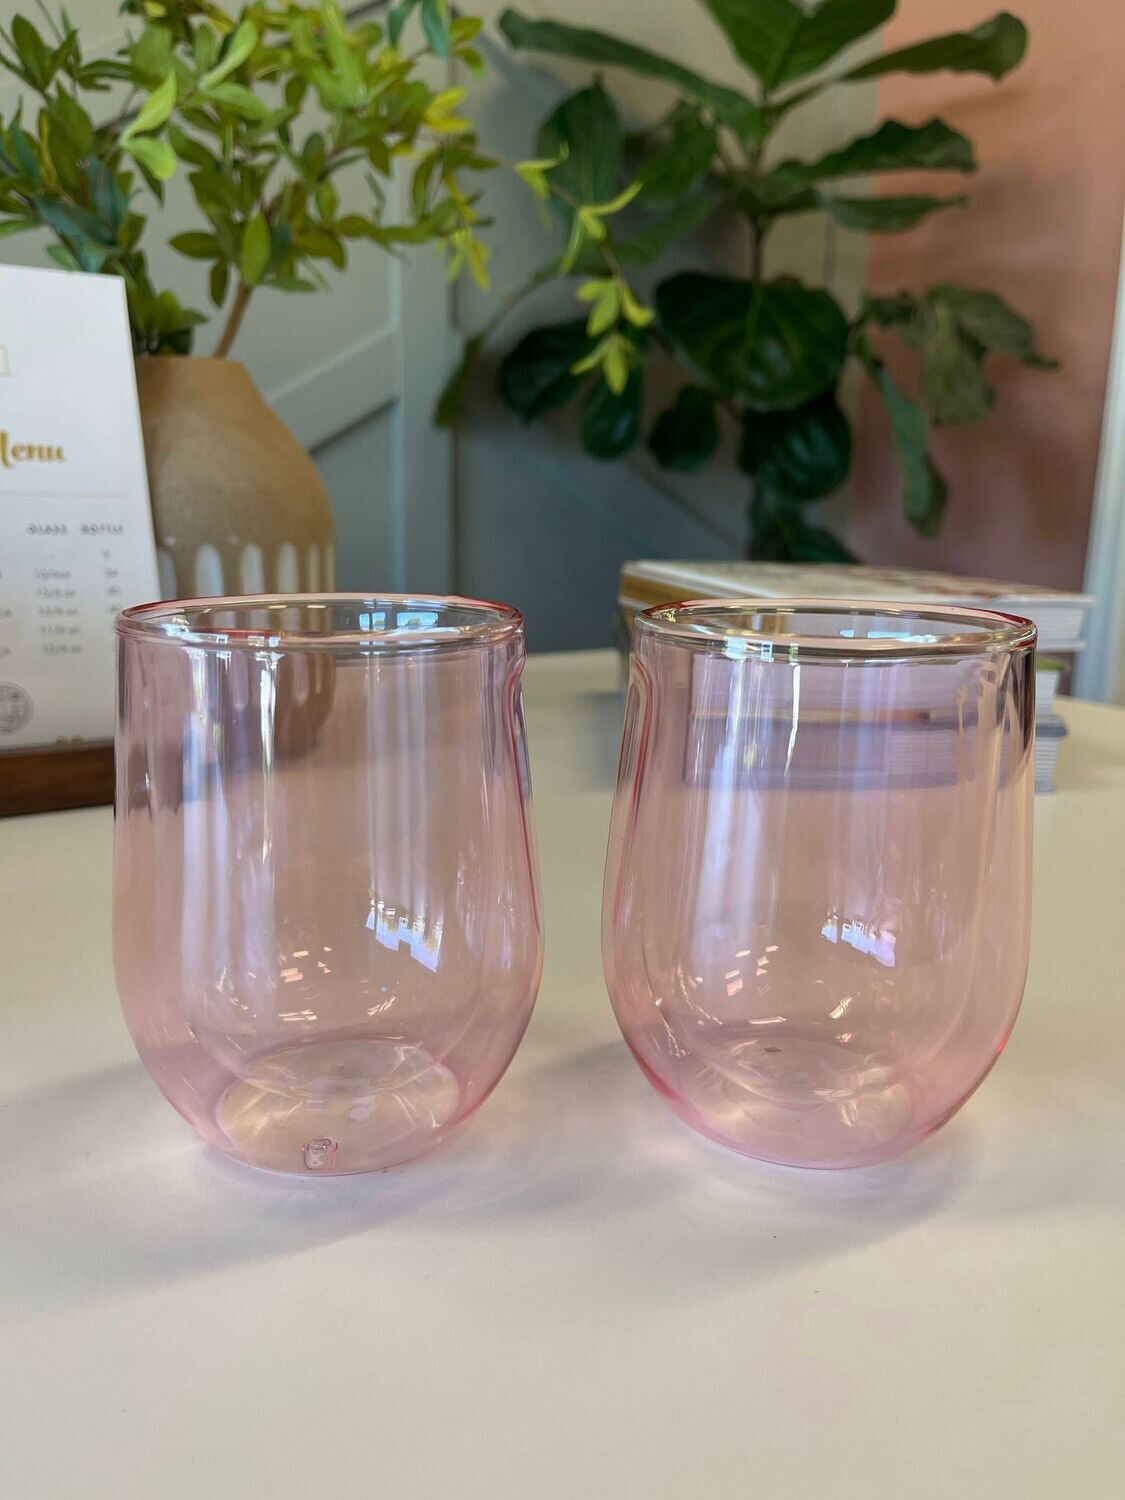 Corkcicle Stemless Glass (set of 2)